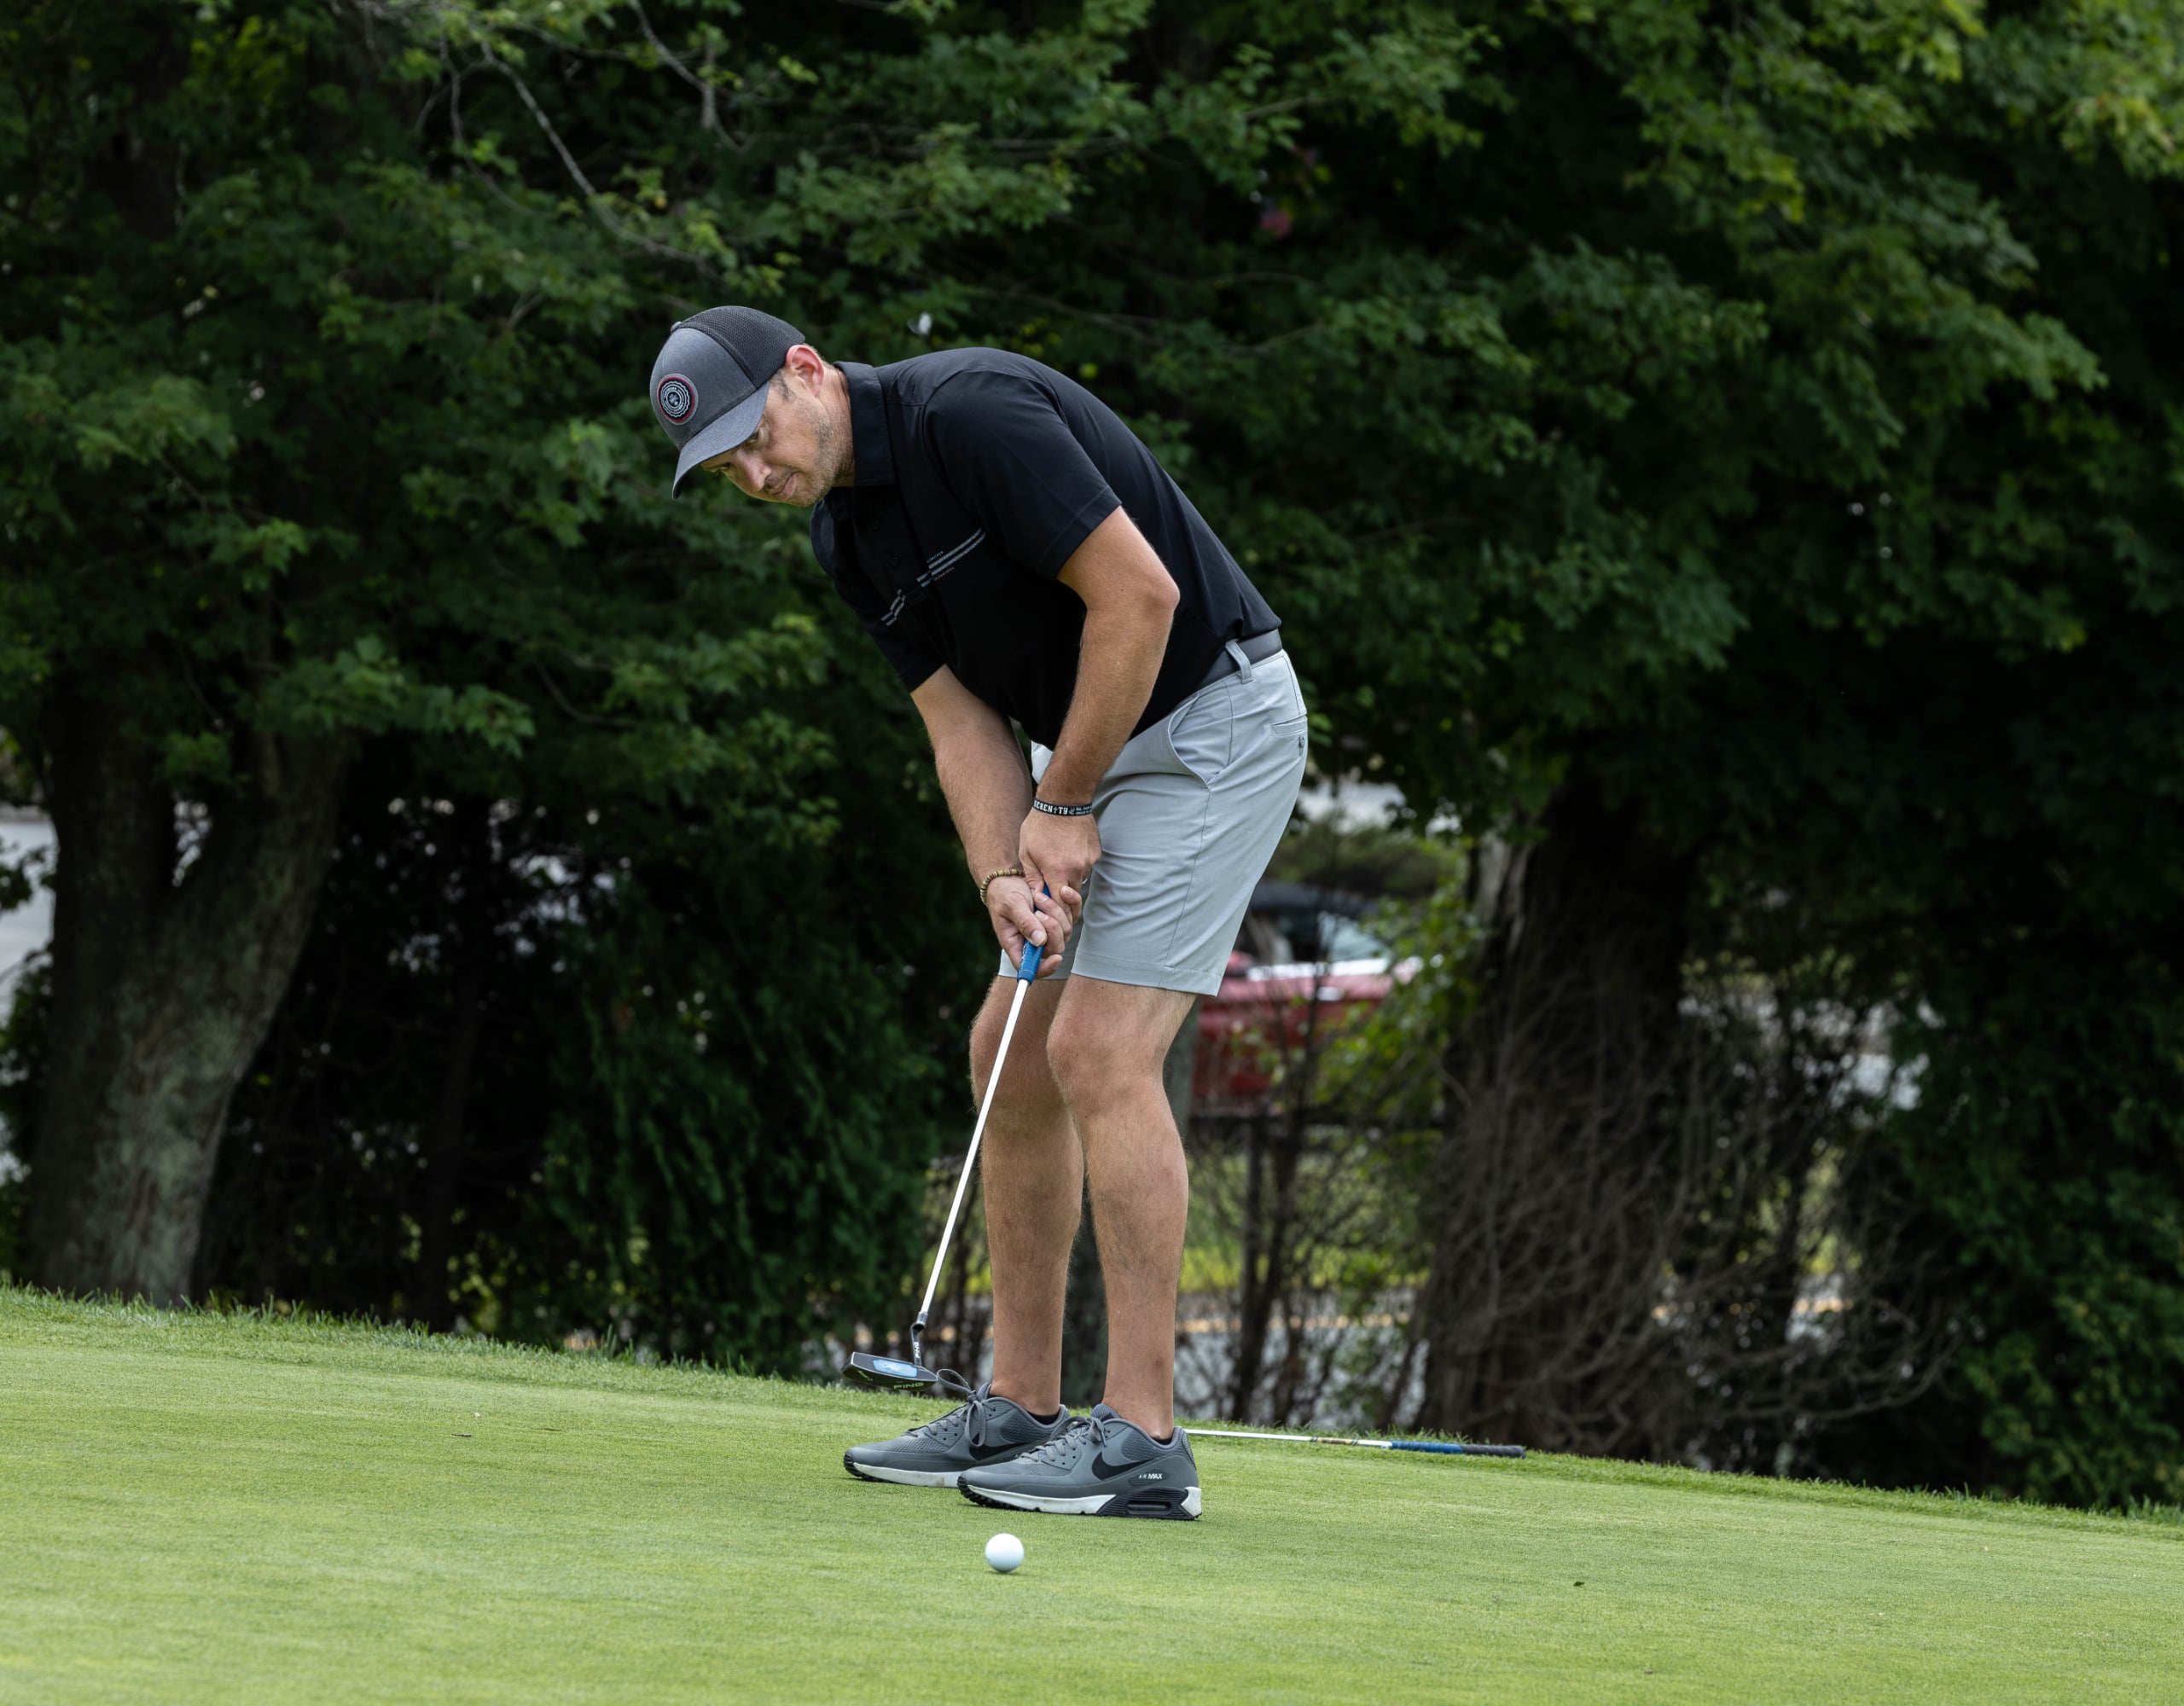 Country-Club-Of-New-Bedford FB-2023-Mens-FB-Gallery August-2023-Country-Club-Of-New-Bedford-FB-2023-Mens-FB-Gallery August-2023-Mens-FB-Gallery-Thursday-Photos-Image-6